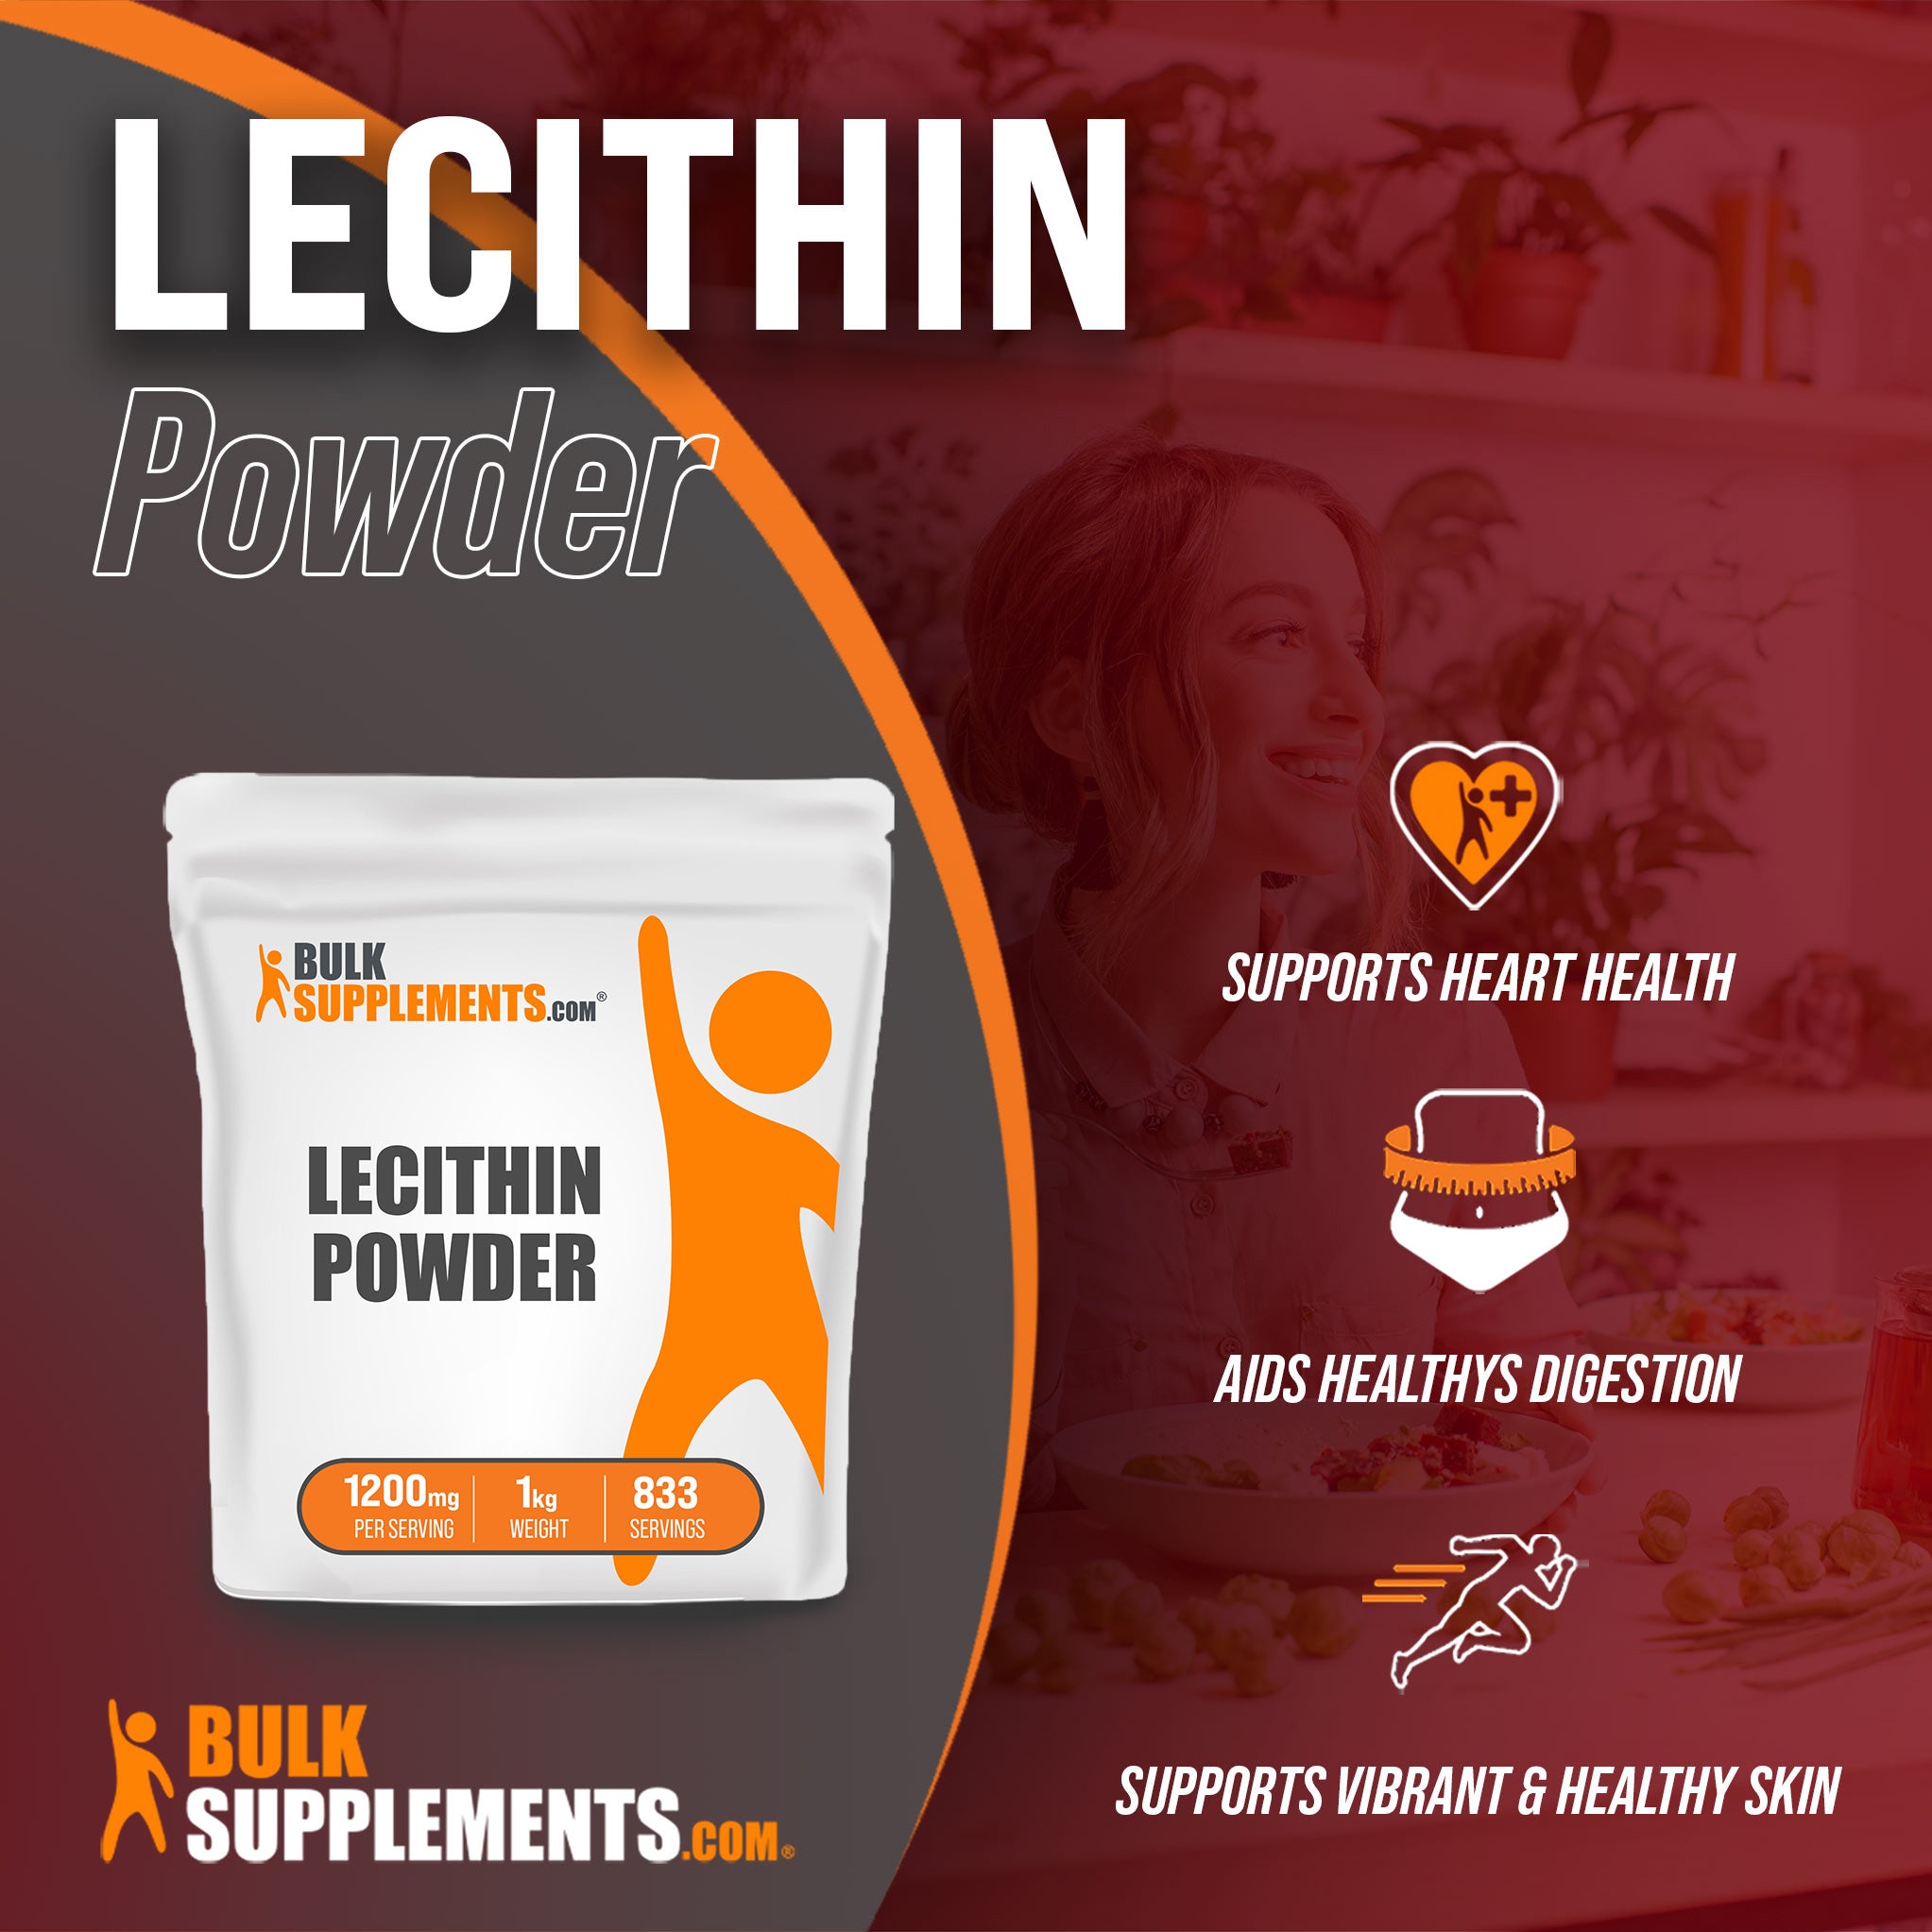 Benefits of Lecithin: supports heart health, aids healthy digestion, supports vibrant and healthy skin